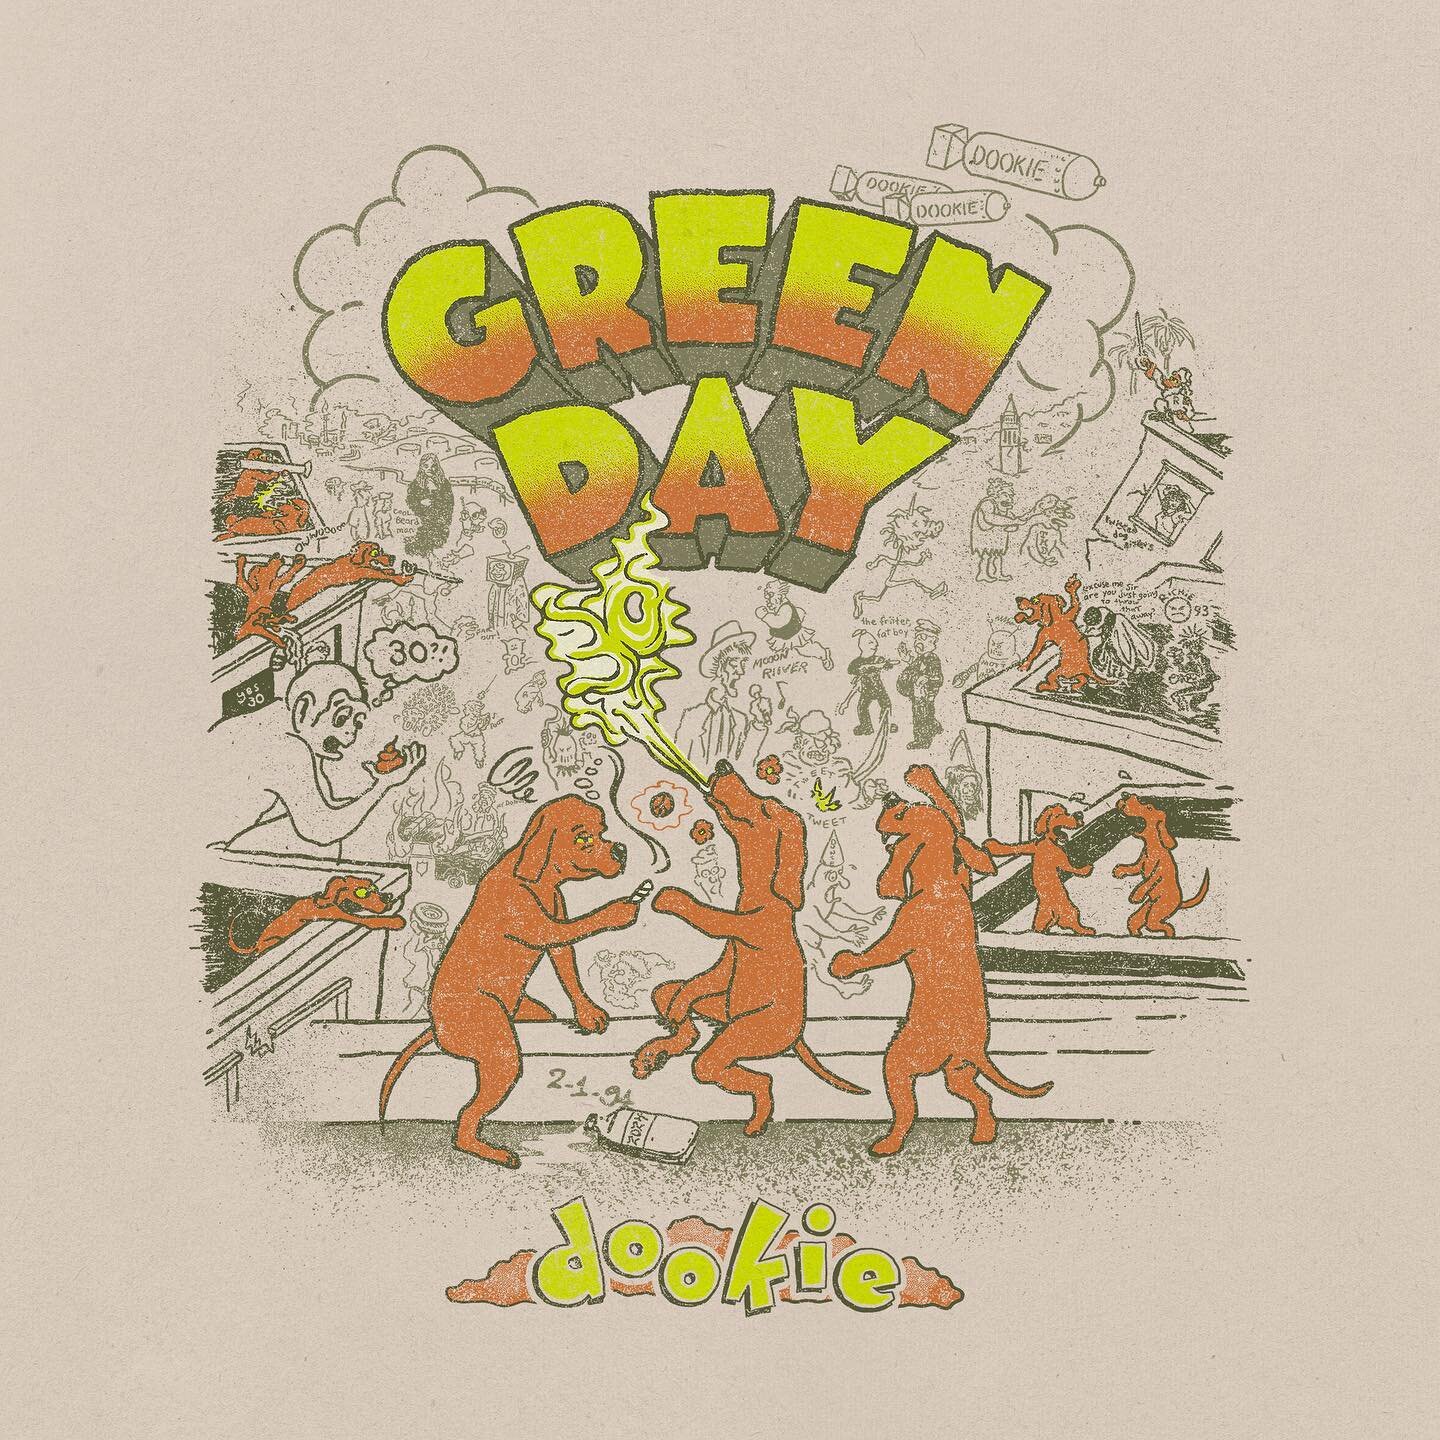 The second design I created for @greenday&rsquo;s 30th anniversary of Dookie! 

It&rsquo;s been a true honor to contribute to this release. A big shoutout to Richie Butcher, the artist and mastermind behind the iconic album art. I had a blast studyin